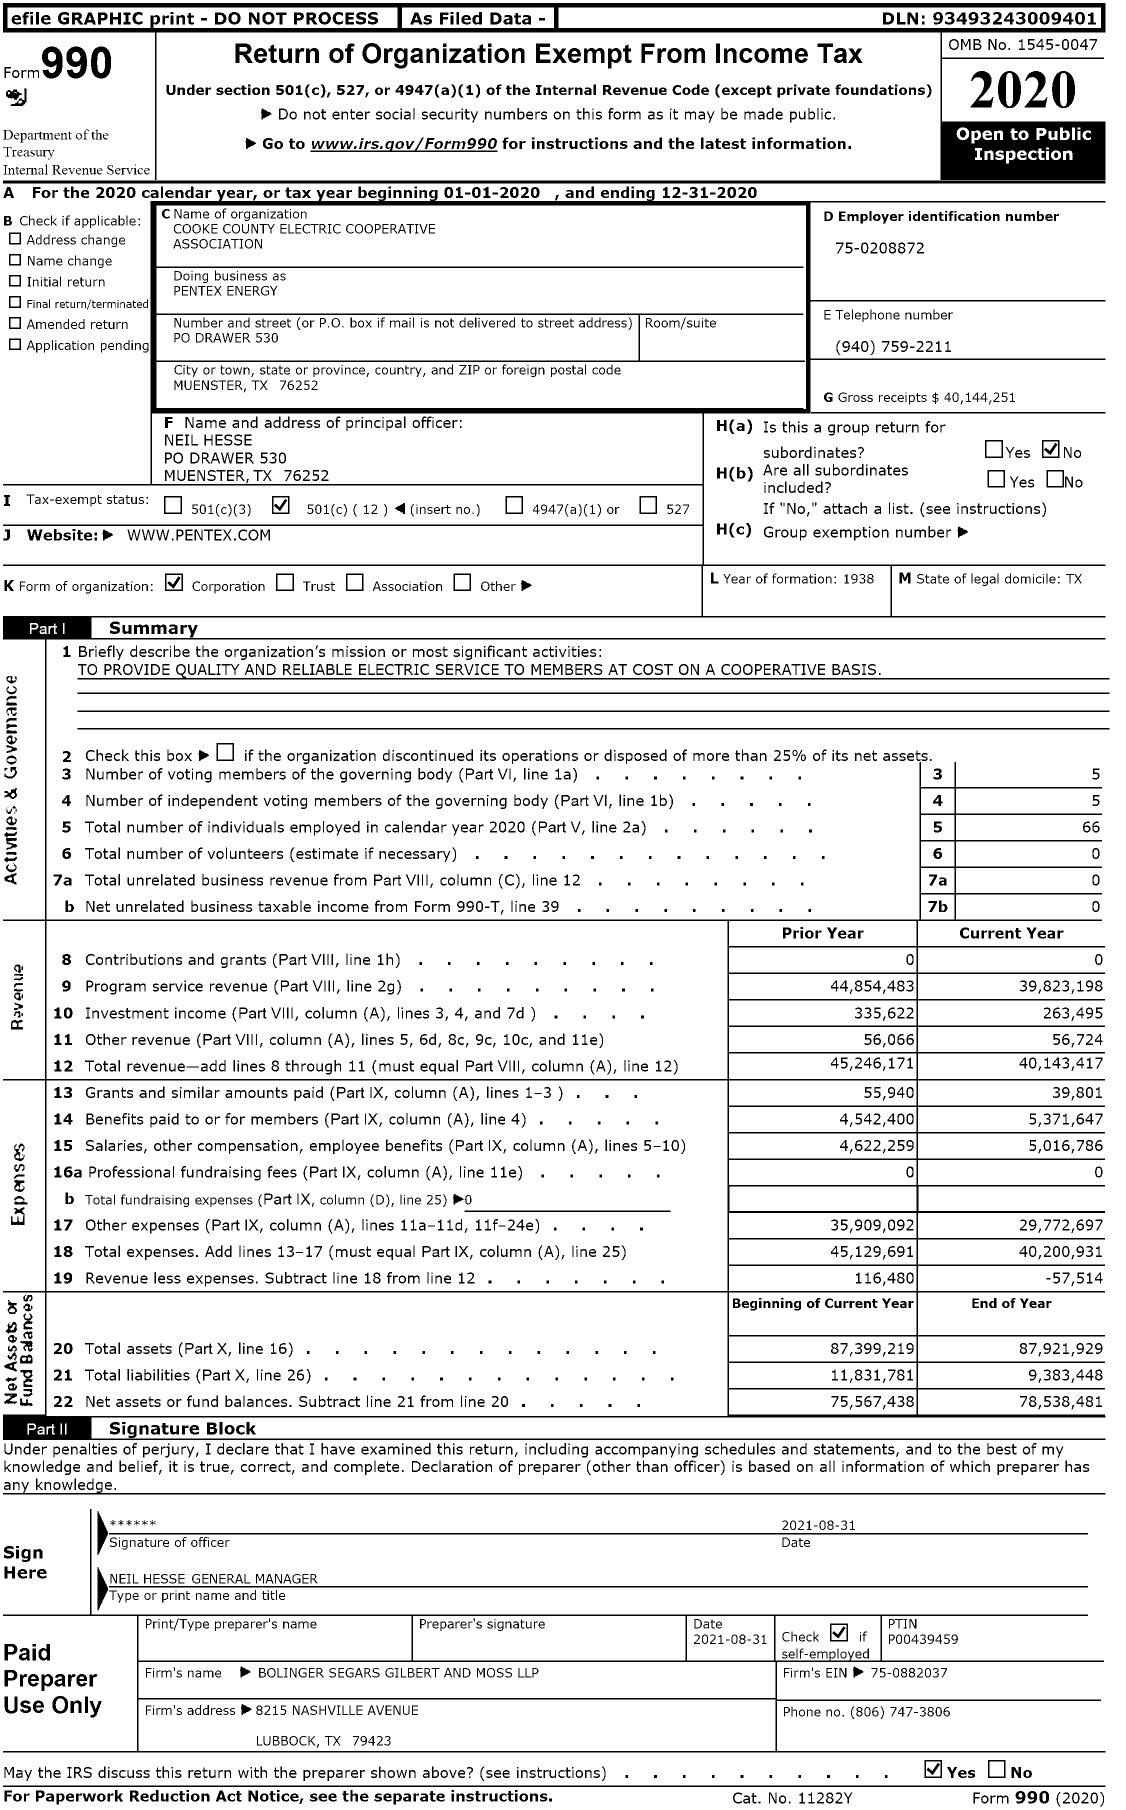 Image of first page of 2020 Form 990O for Pentex Energy